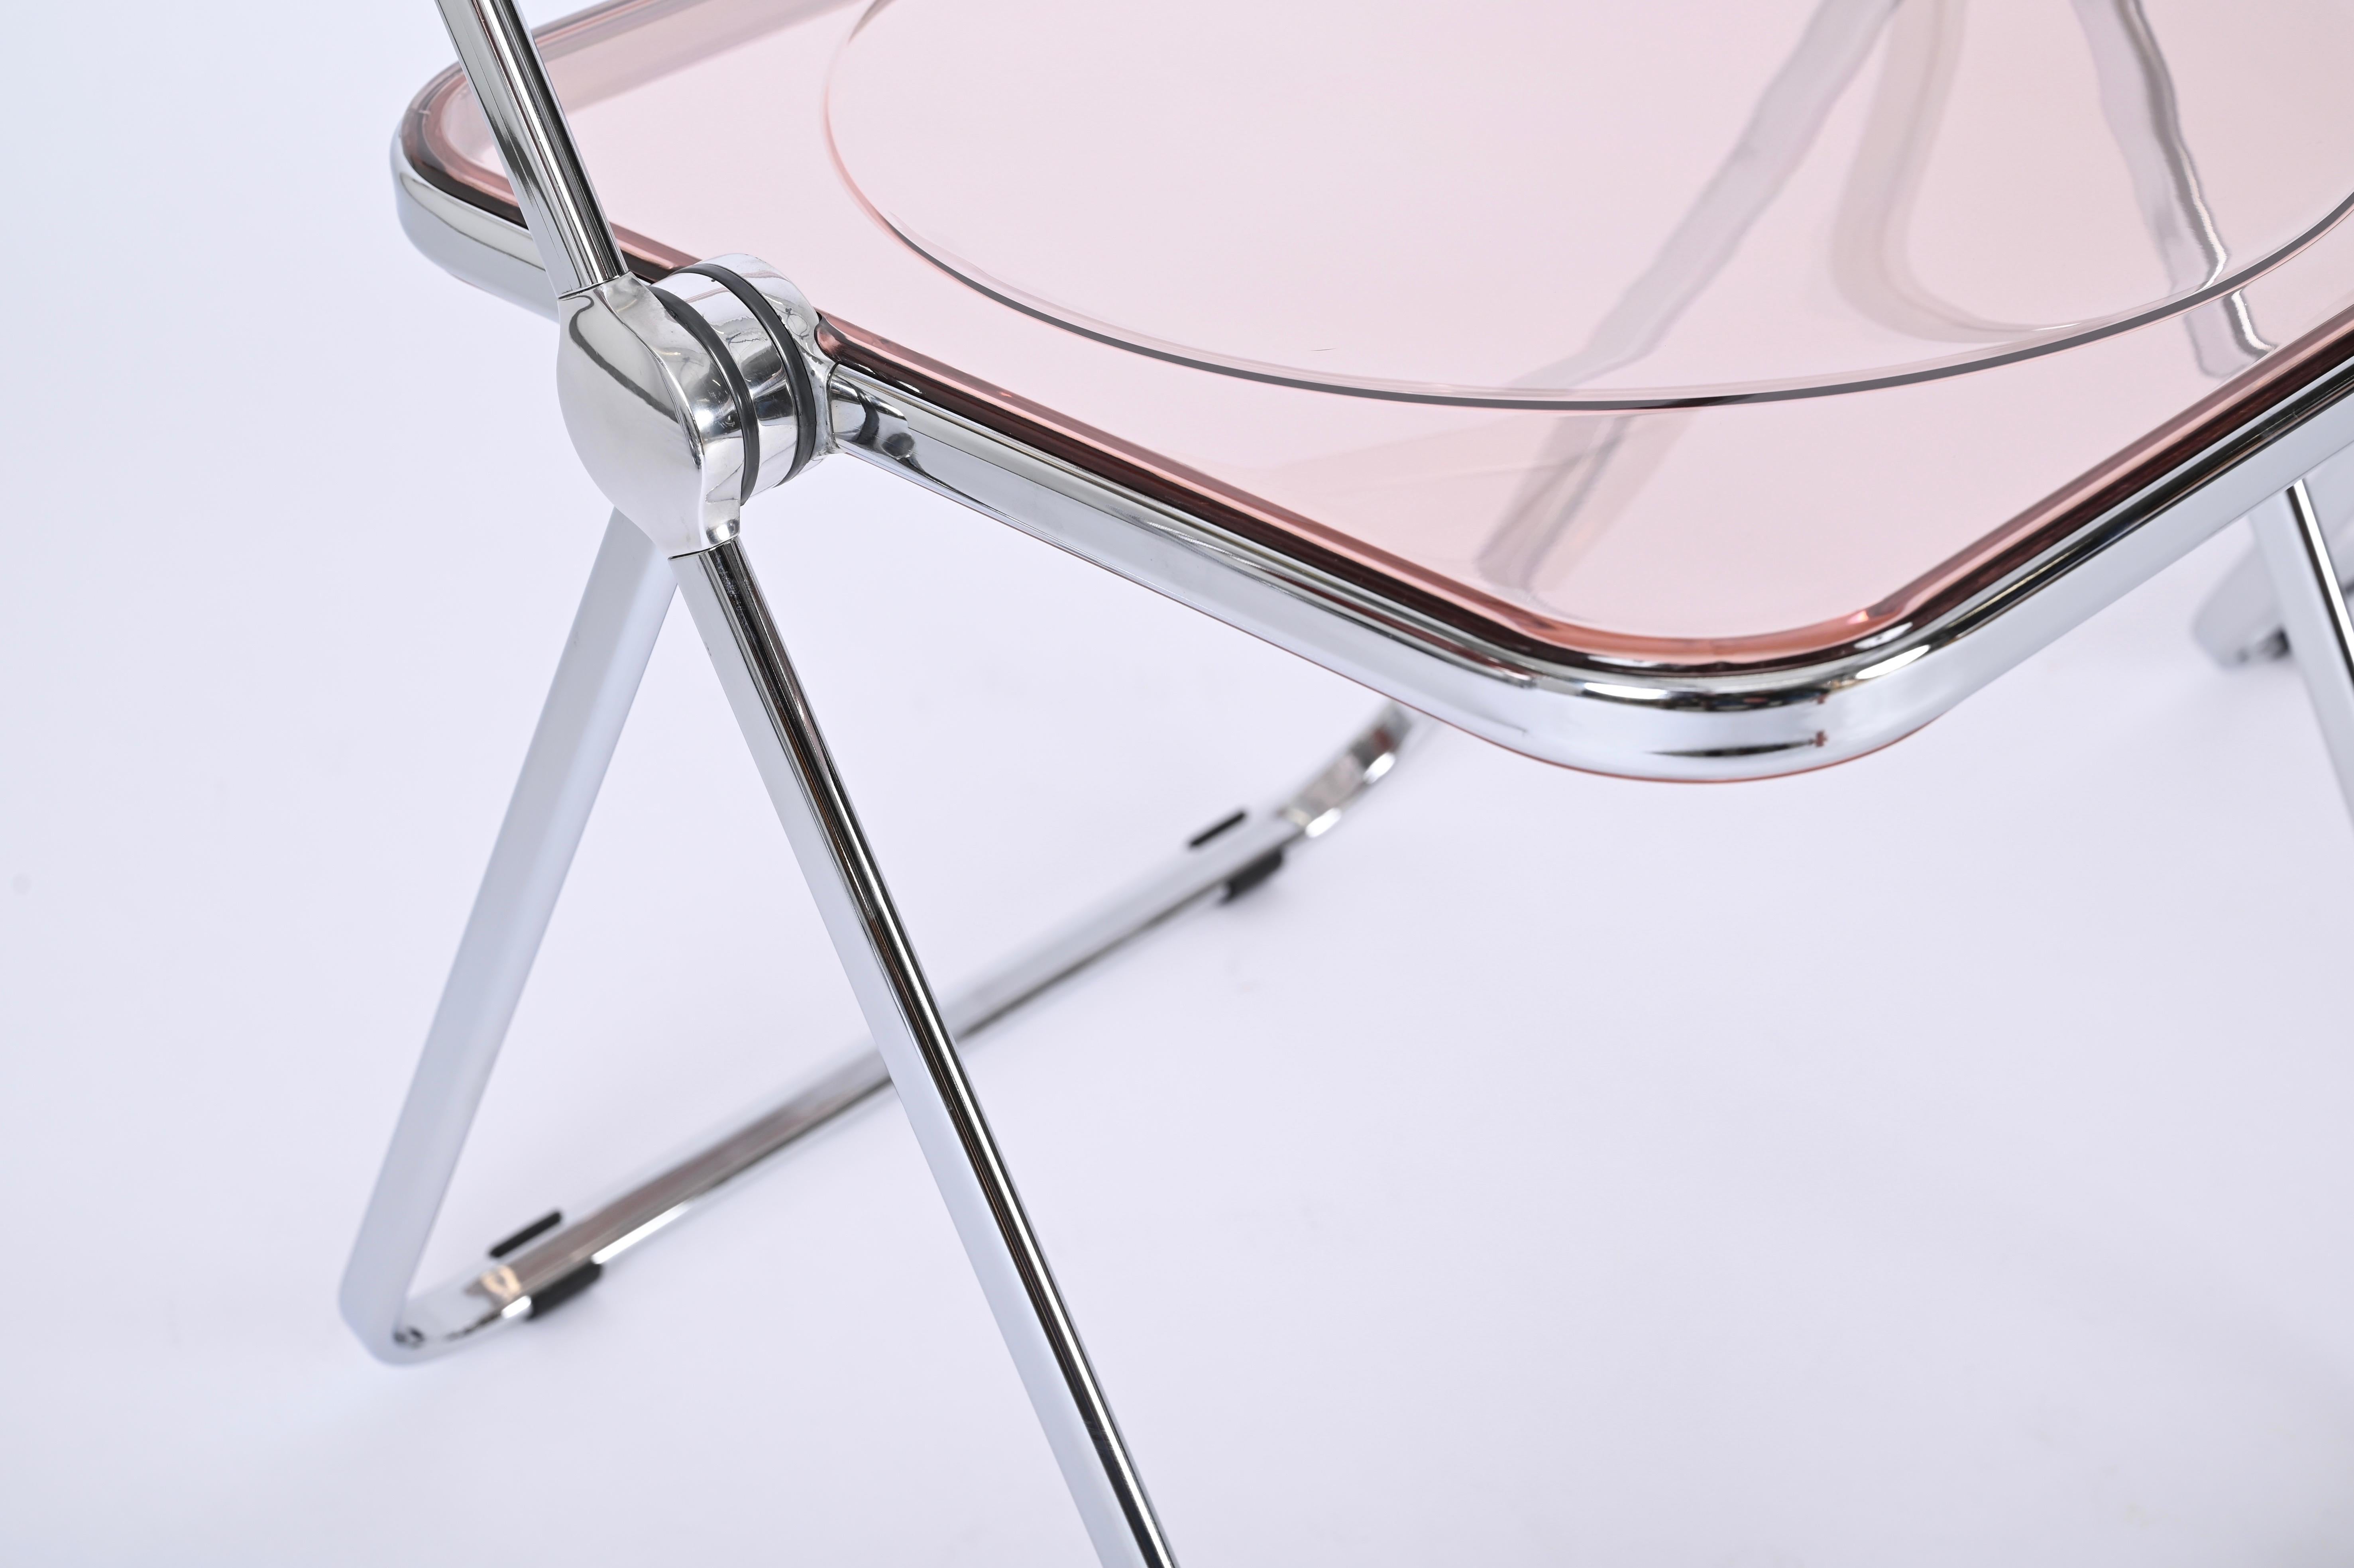 Set of 6 Lucite Pink and Chrome Plia Chairs, Piretti for Castelli, Italy 1970s For Sale 1